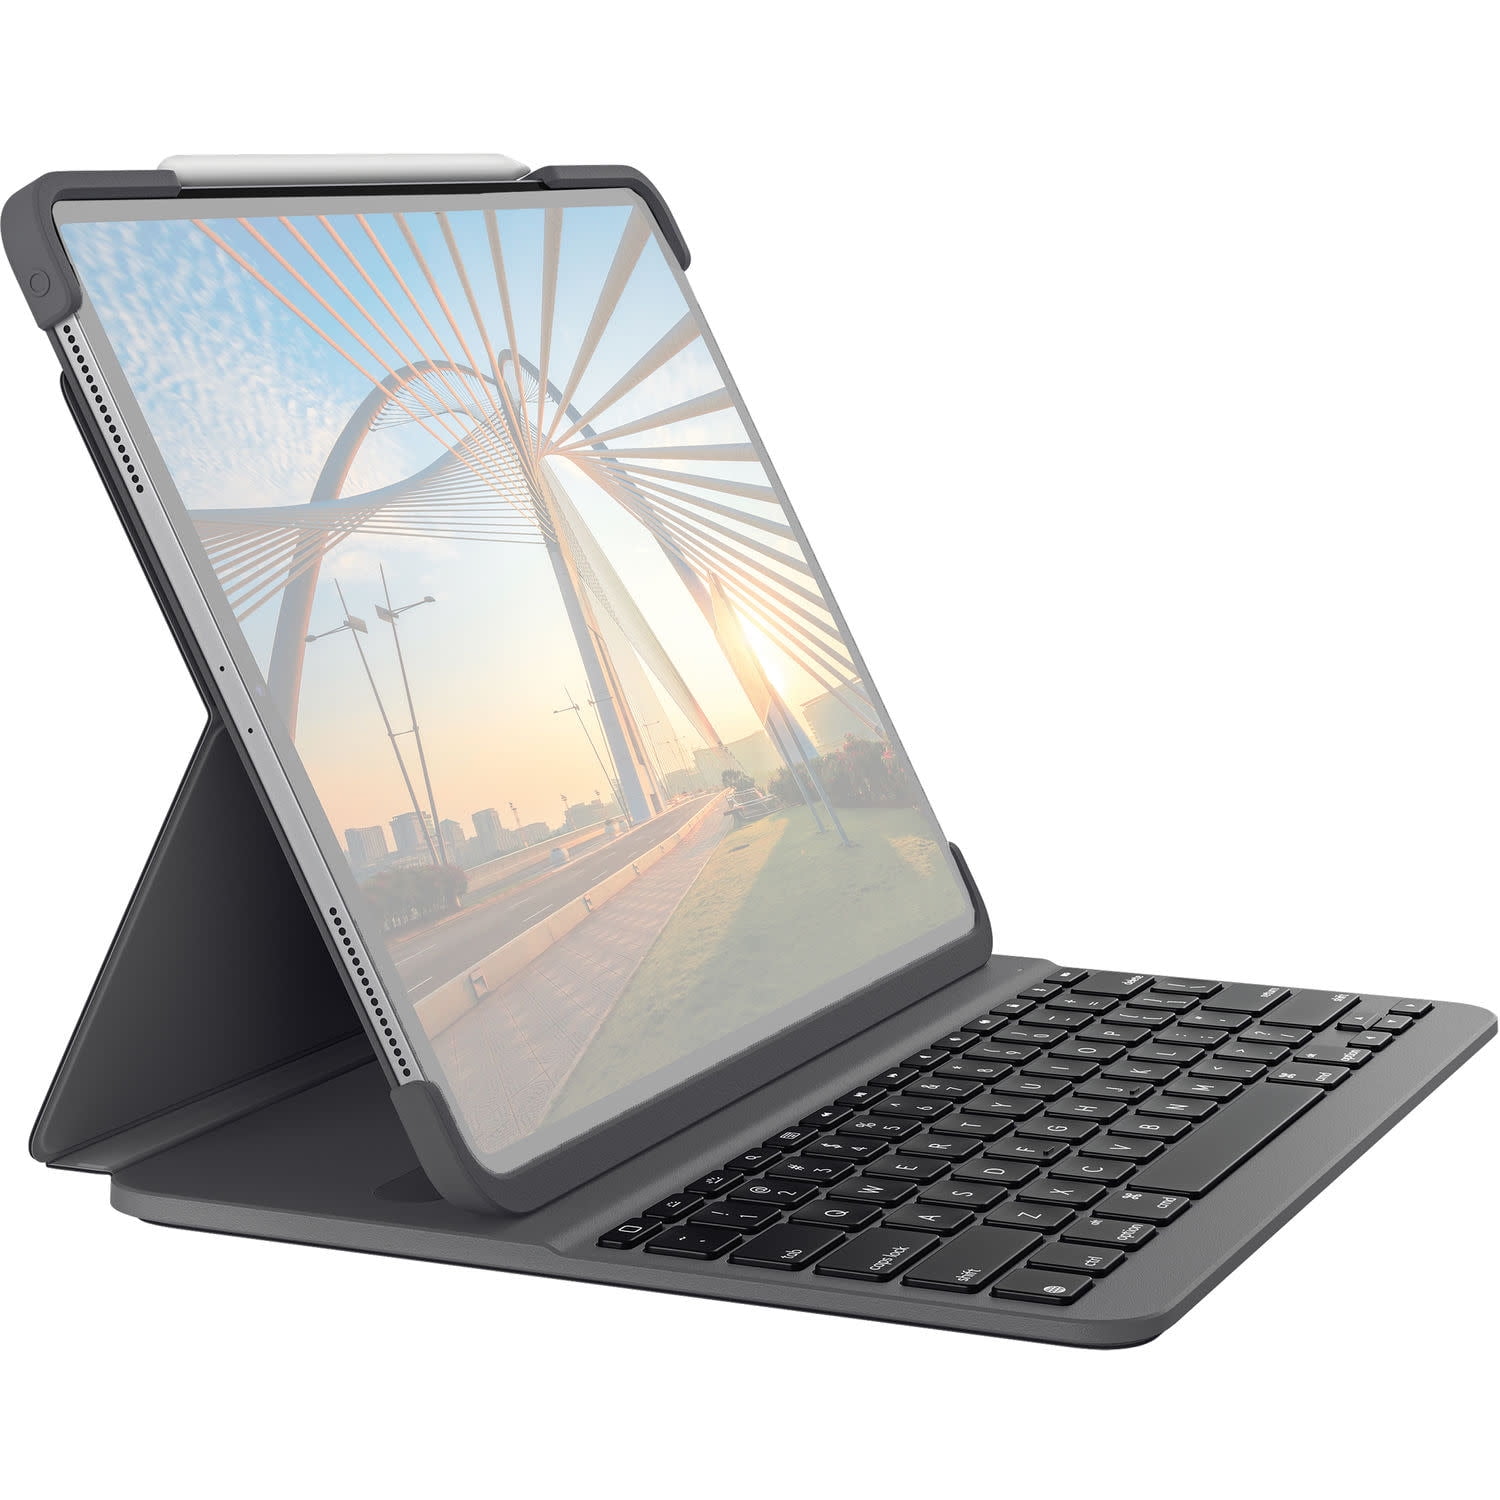 måle Sober ikke Logitech Slim Folio Pro Backlit Bluetooth Keyboard Case for iPad Pro  11-inch (1st, 2nd and 3rd gen) and 12.9-inch (3rd and 4th gen), Graphite -  Walmart.com